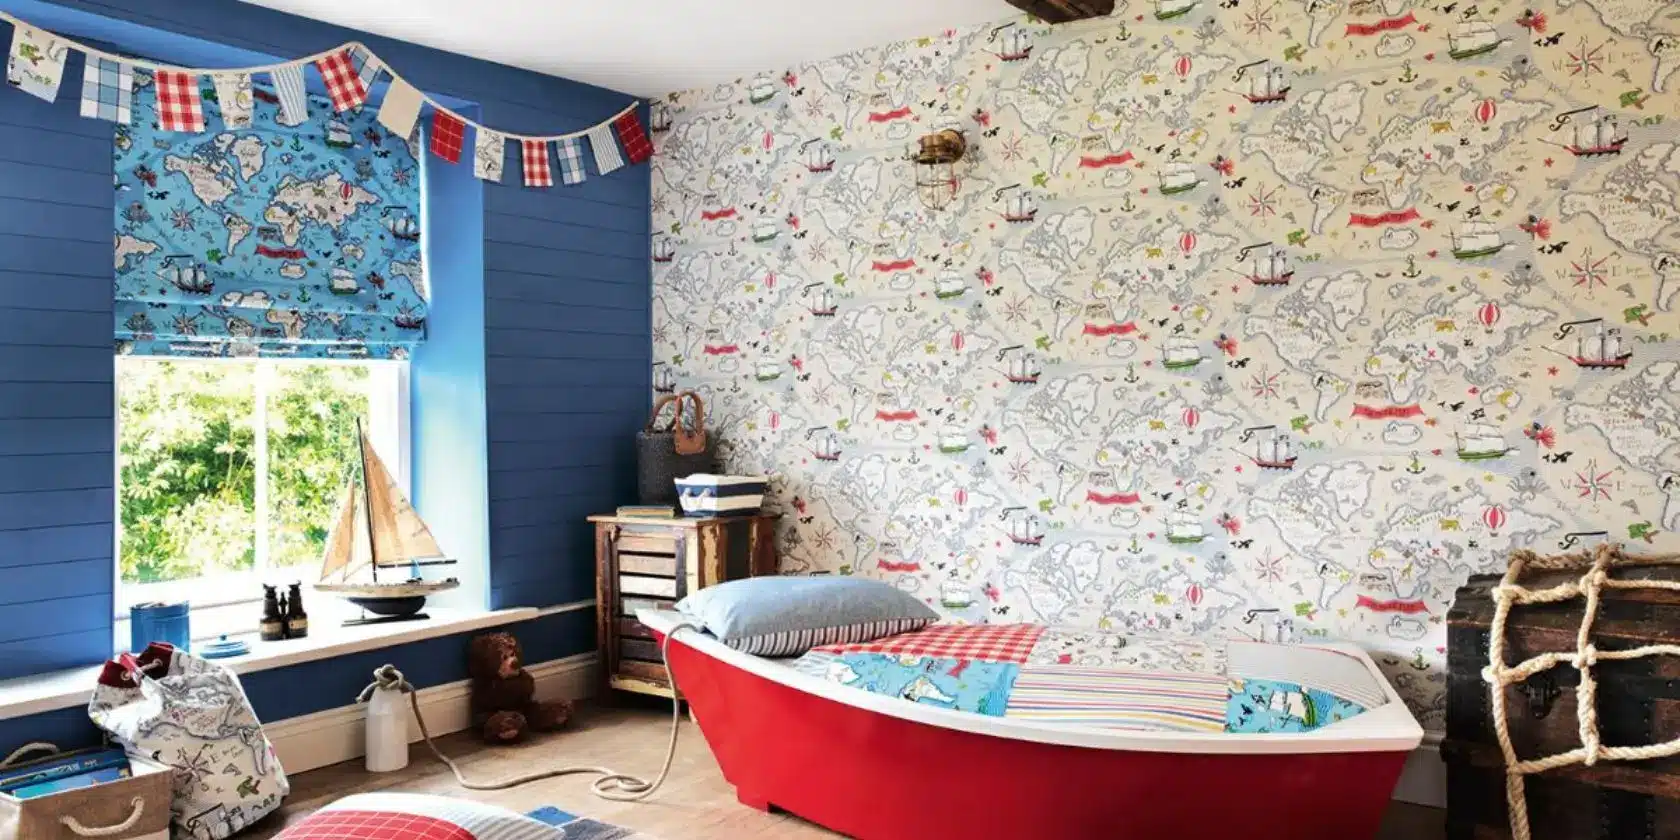 Find out how to decorate a child's room with wallpaper with tips from Zefiro Interiors